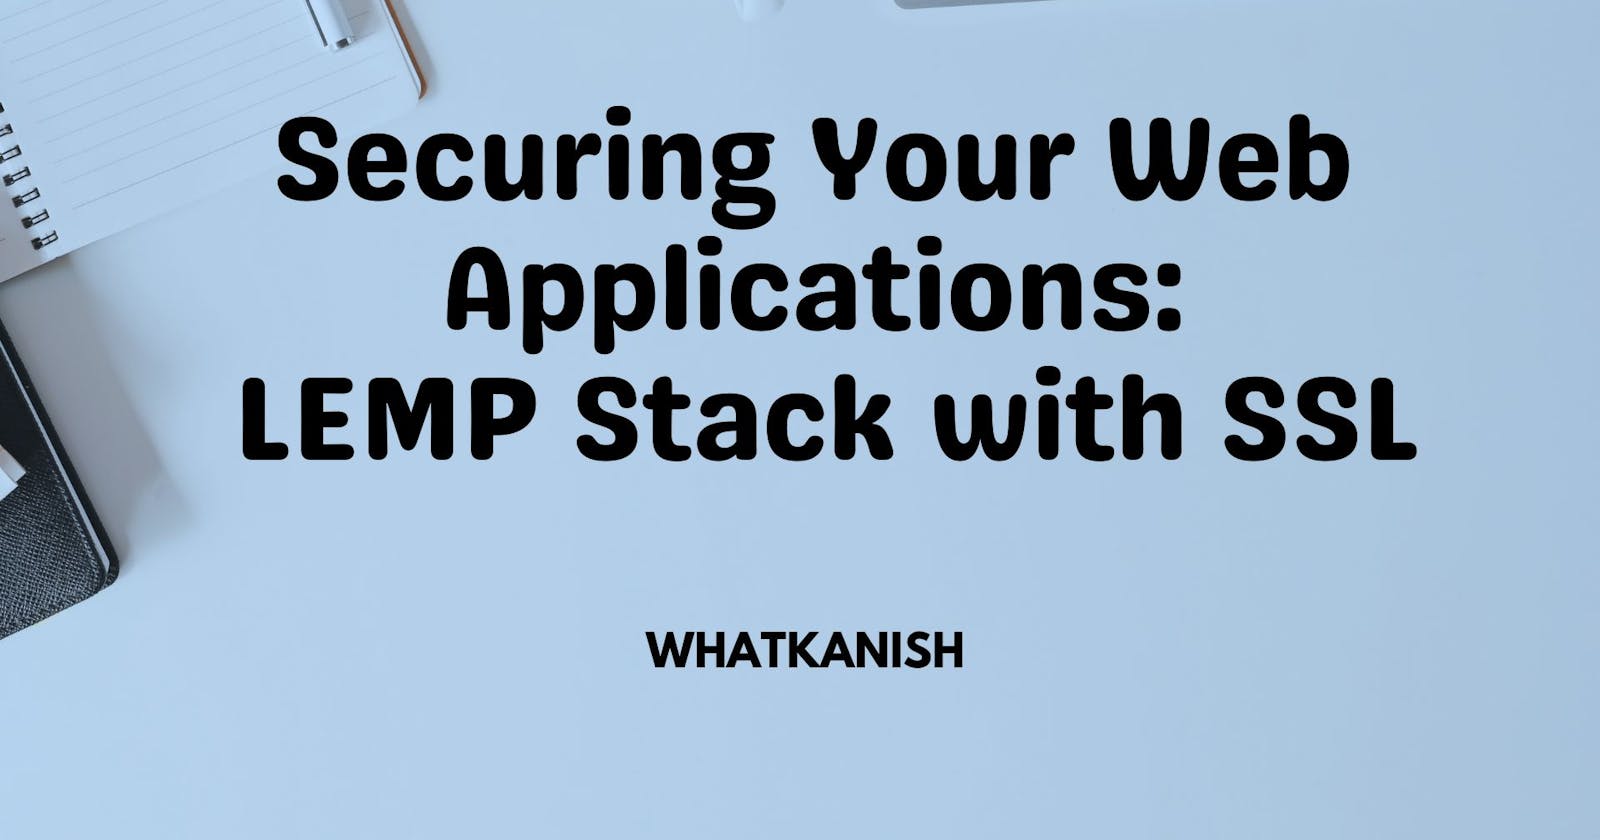 💻Setting Up a LEMP Stack with SSL